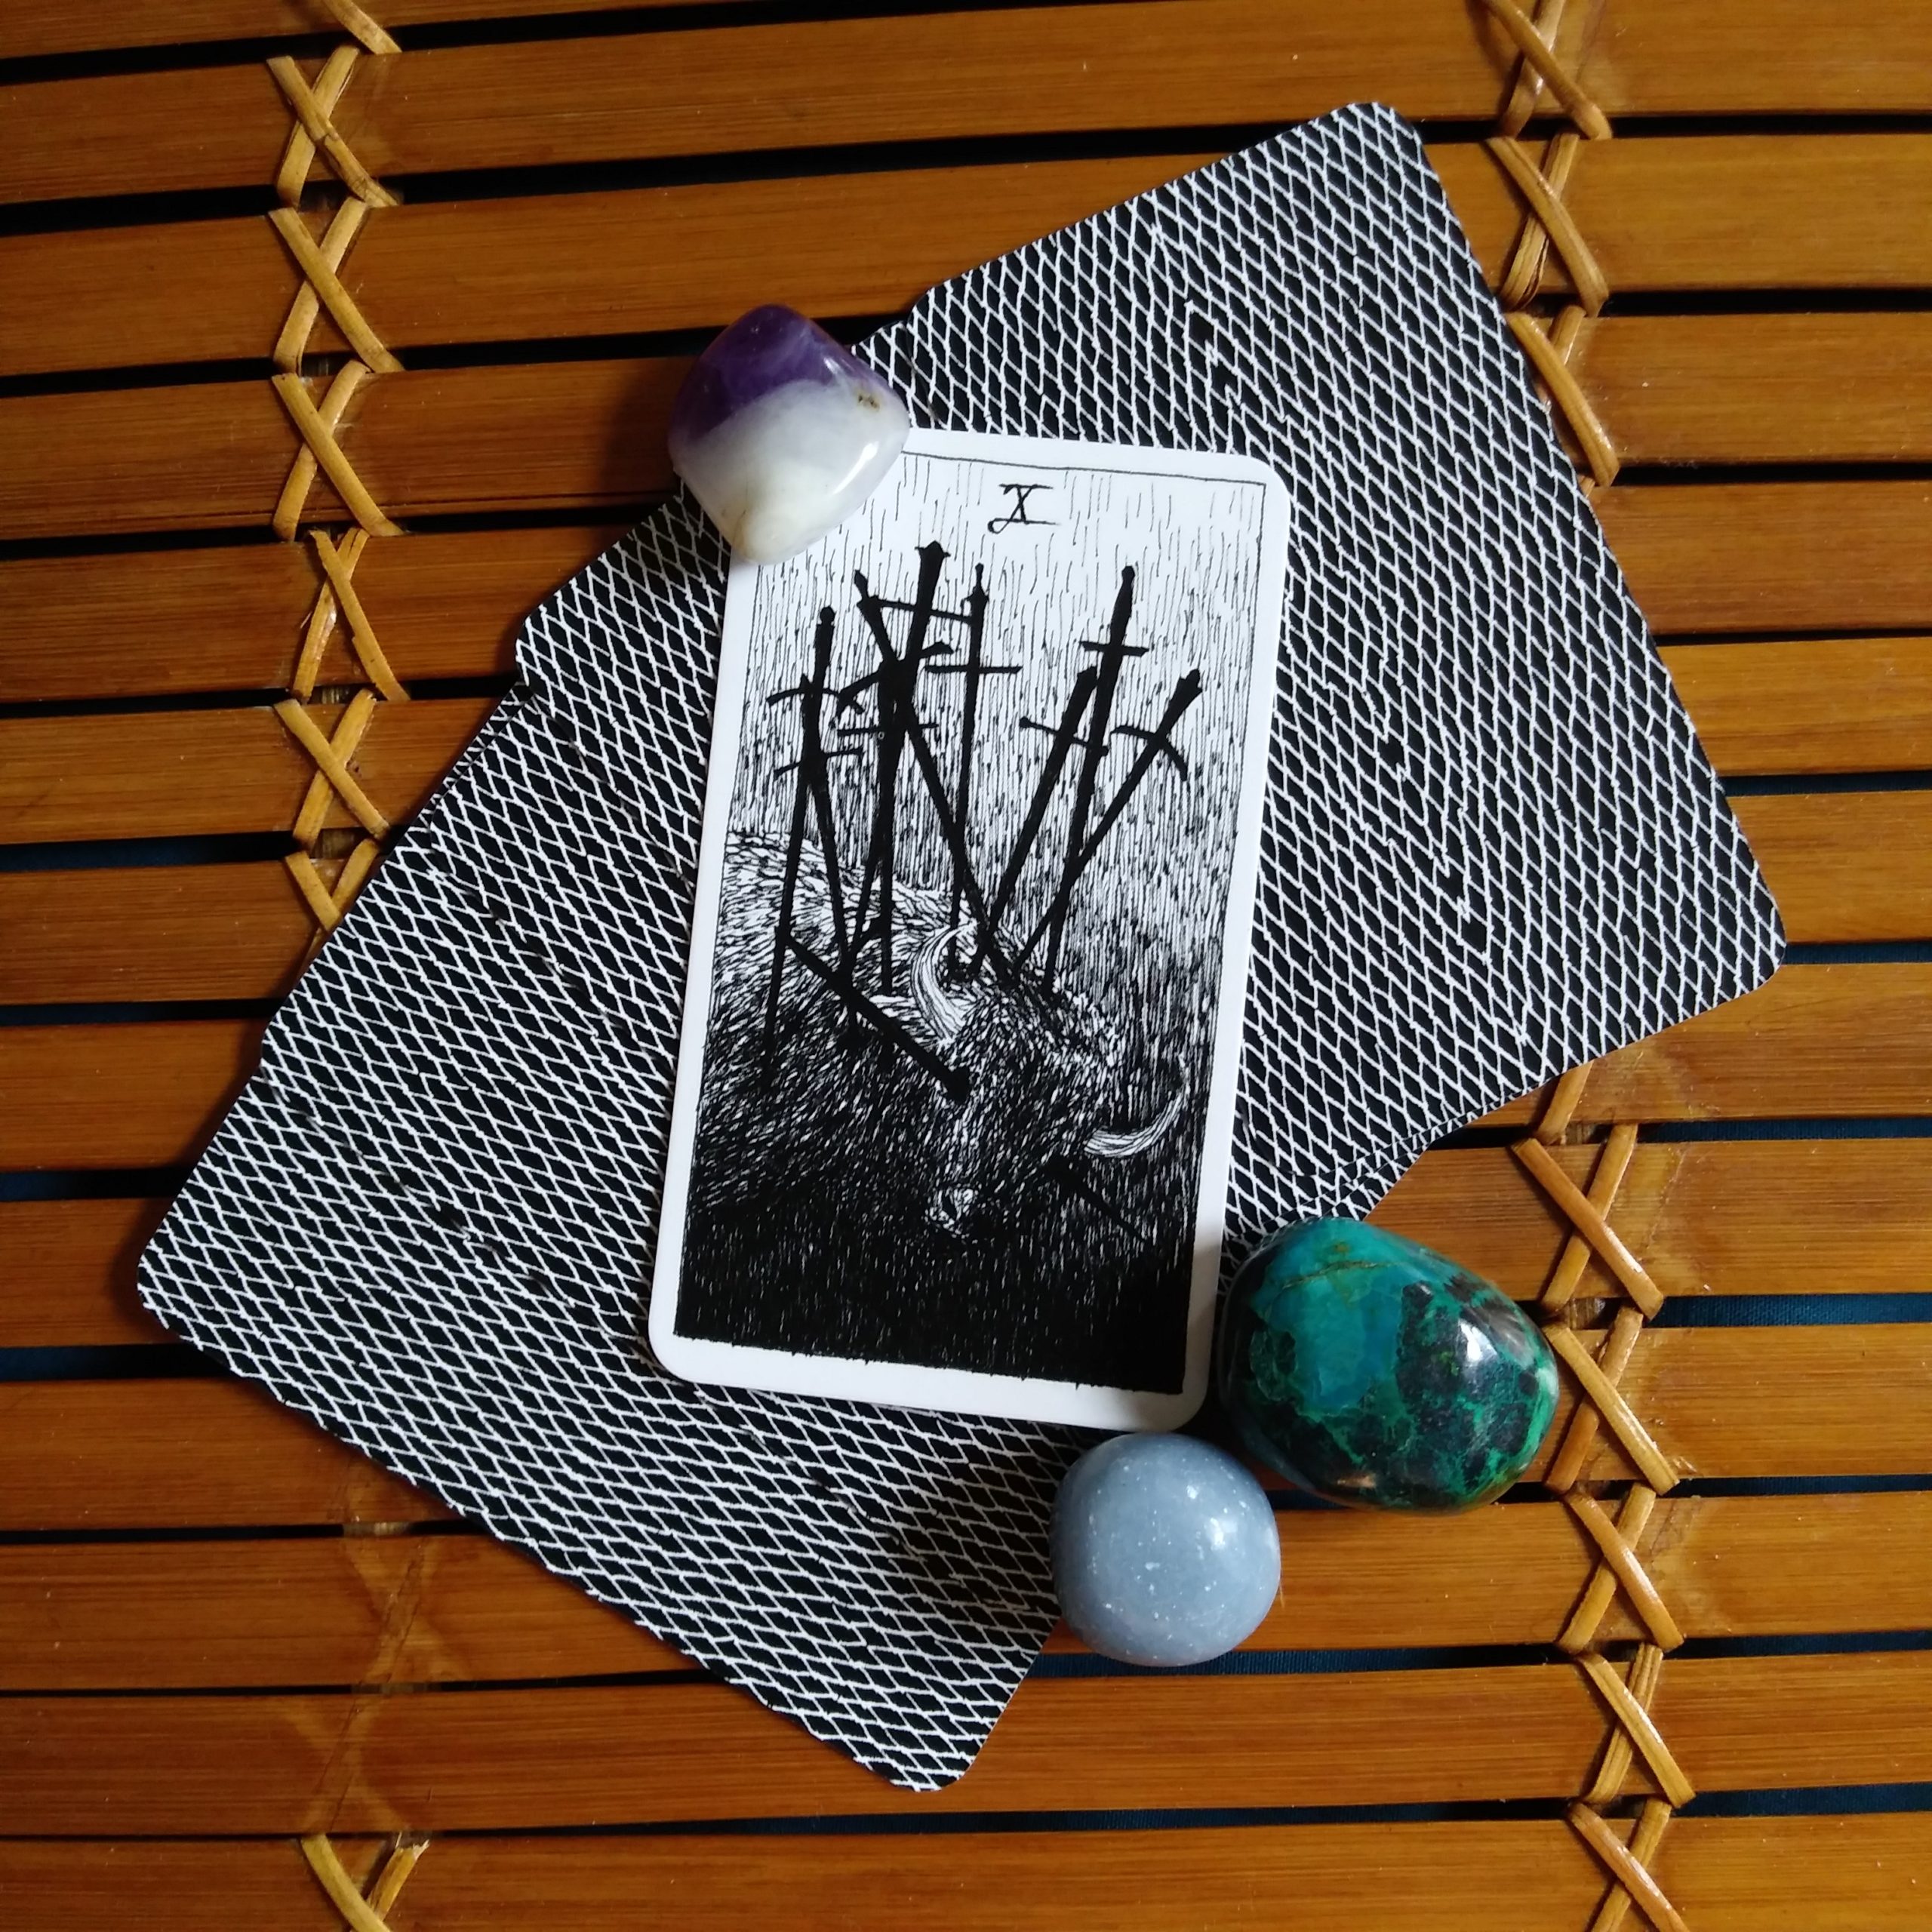 10 of Swords, Mini Wild Unknown Tarot, A message from the Universe